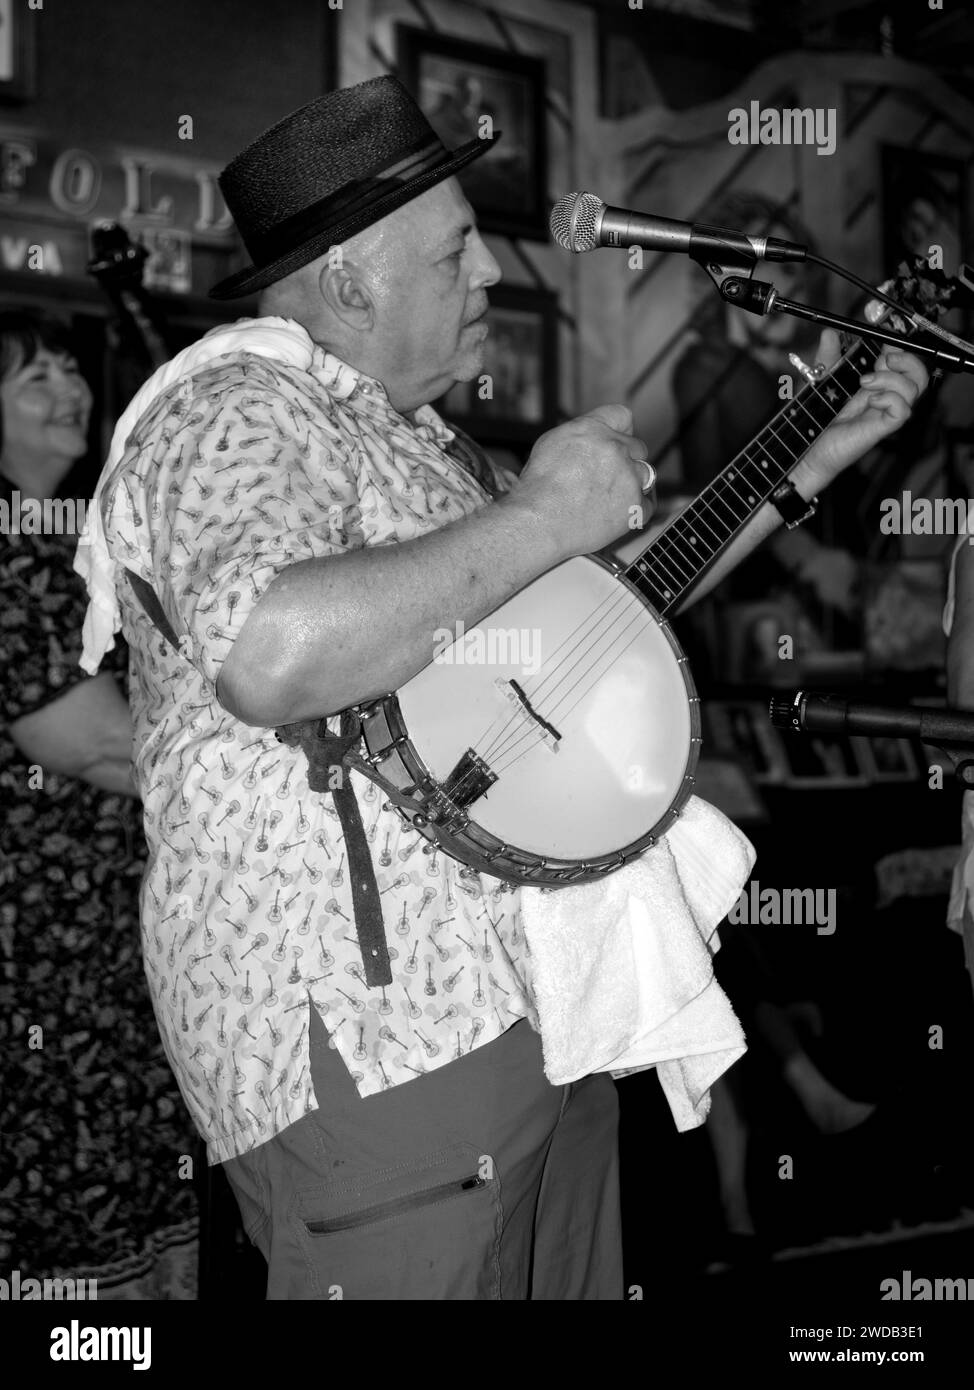 Abingdon, Va., physician Dr. Mark Handy performs with his band, Leftover Biscuits, at The Carter Fold music venue in rural Southwest Virginia. Stock Photo